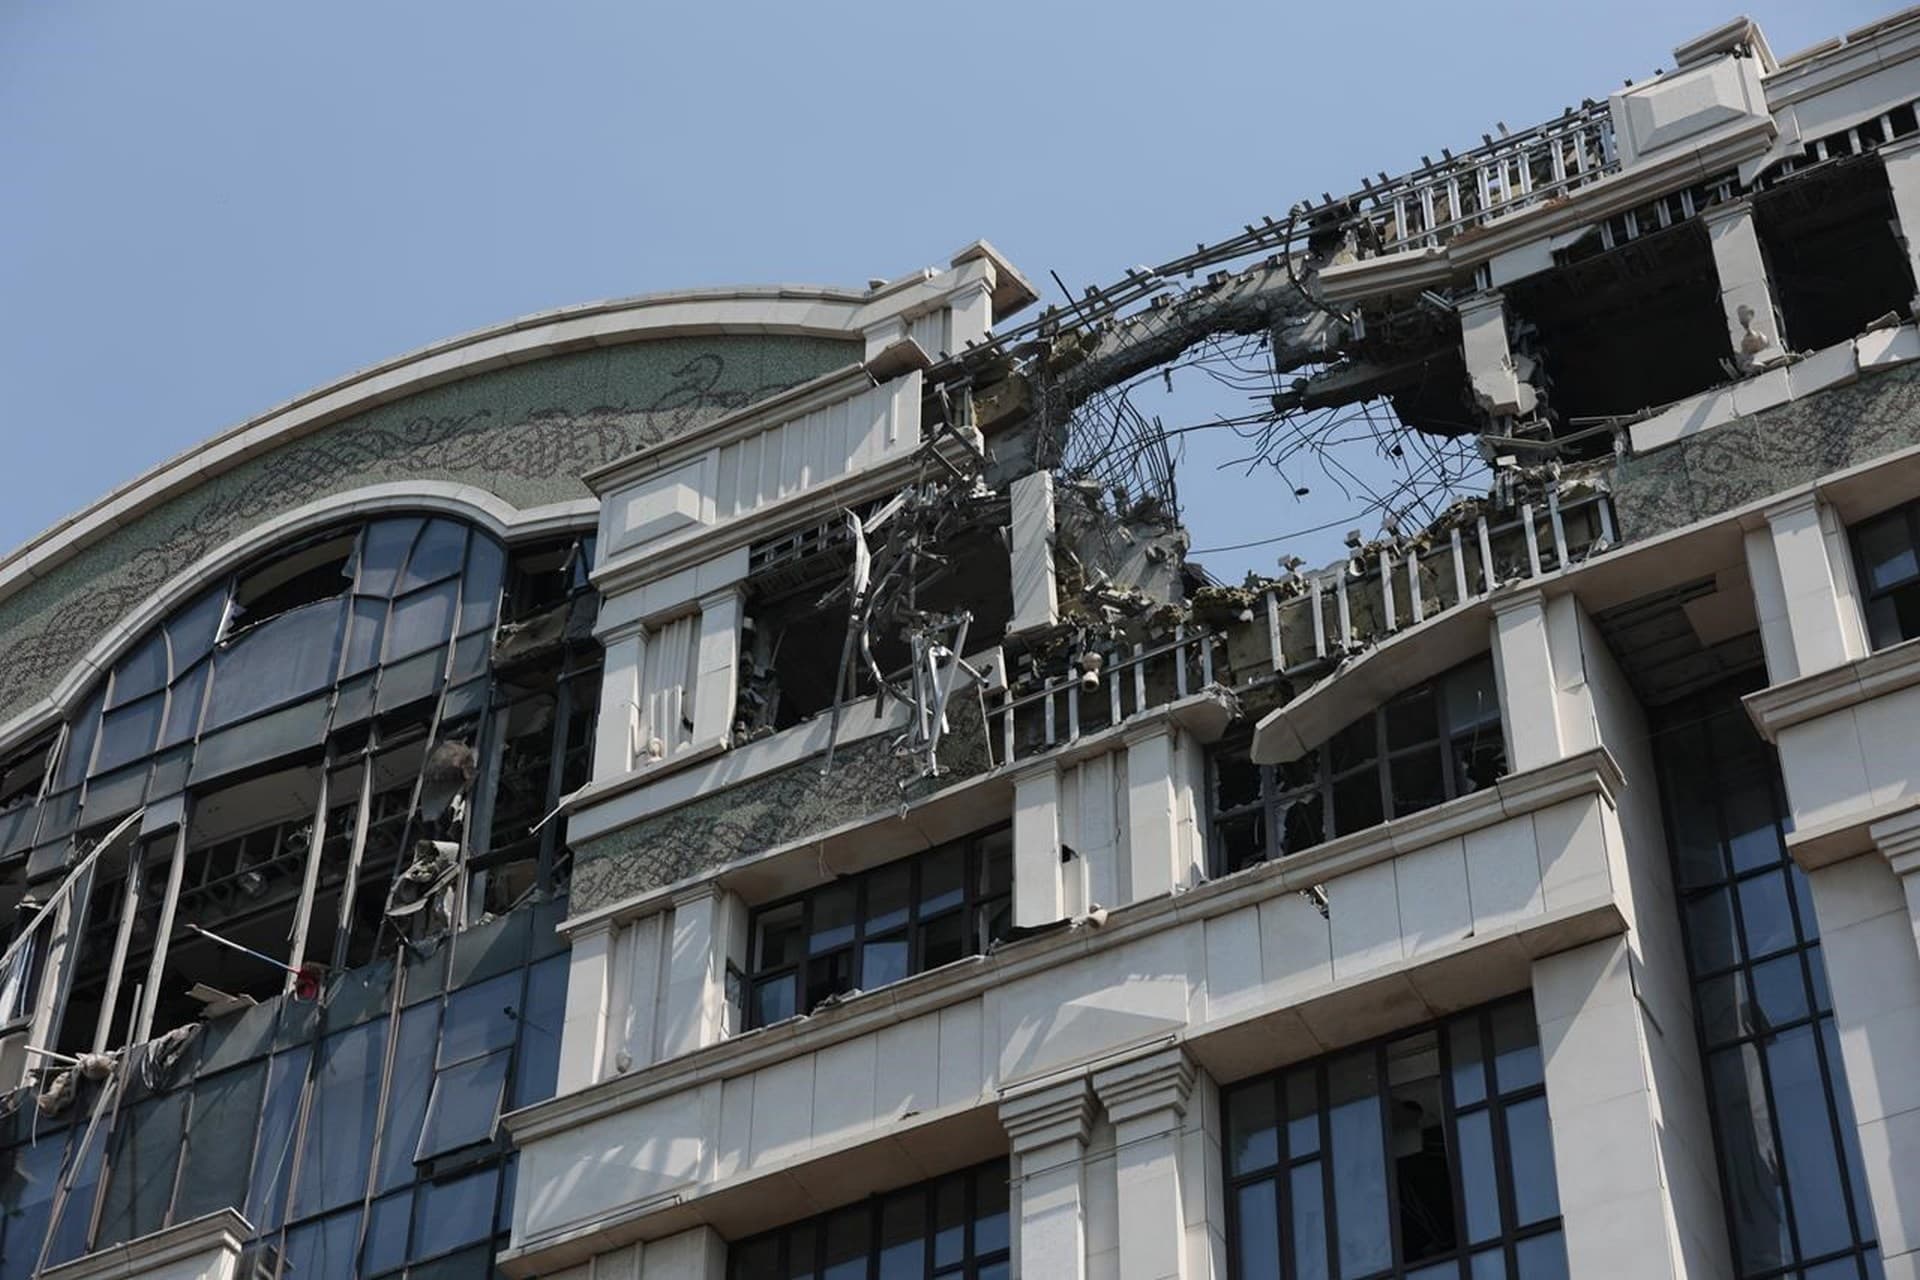 A view of the Donetsk People's Republic's administration building damaged by shelling in Donetsk